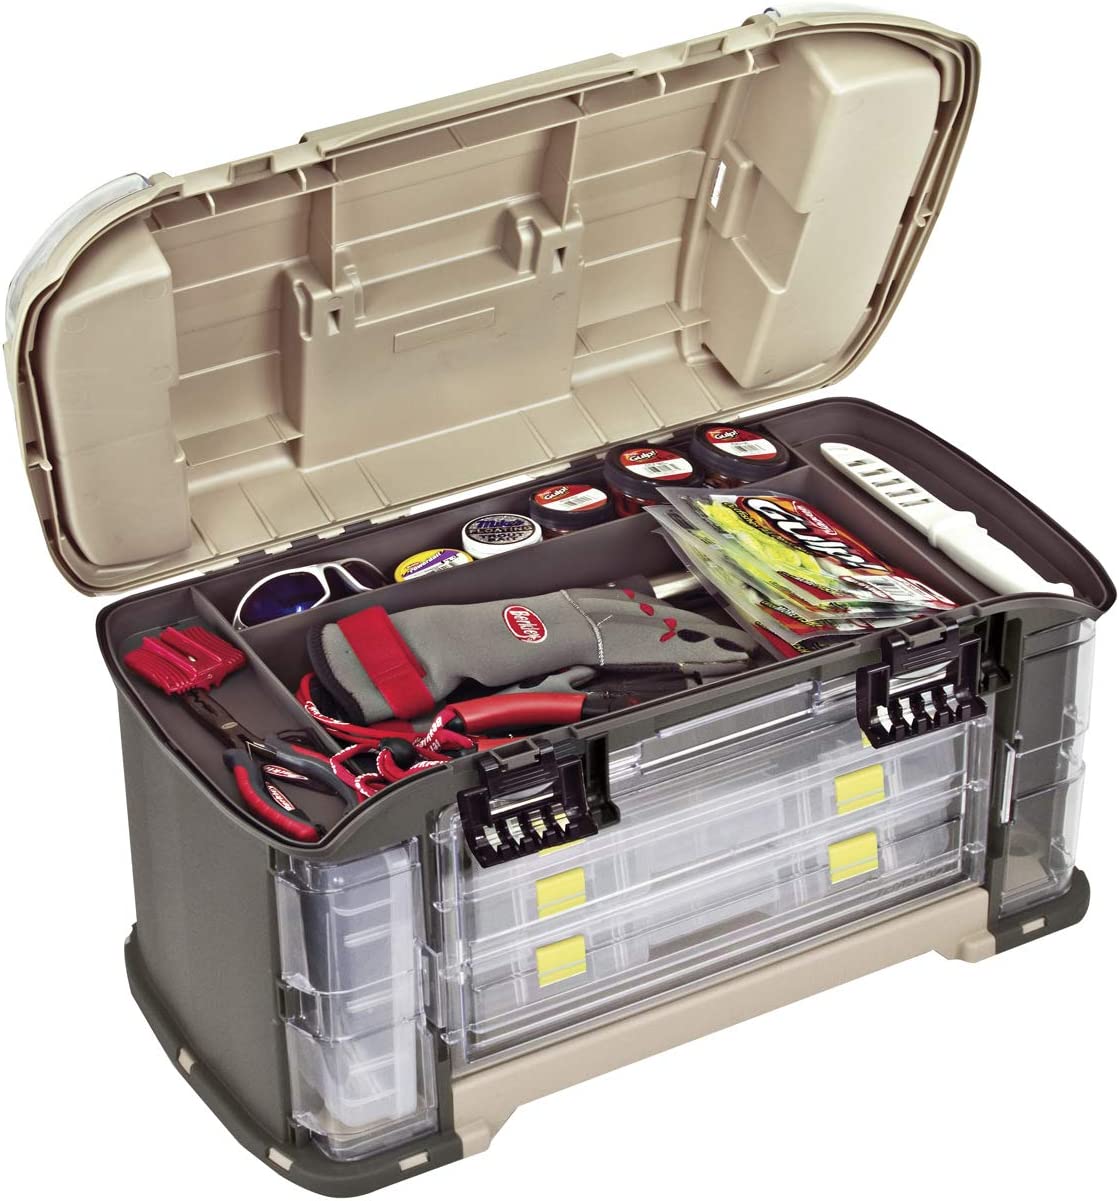 Plano 787 Angled Tackle System - Fishing Tackle Boxes